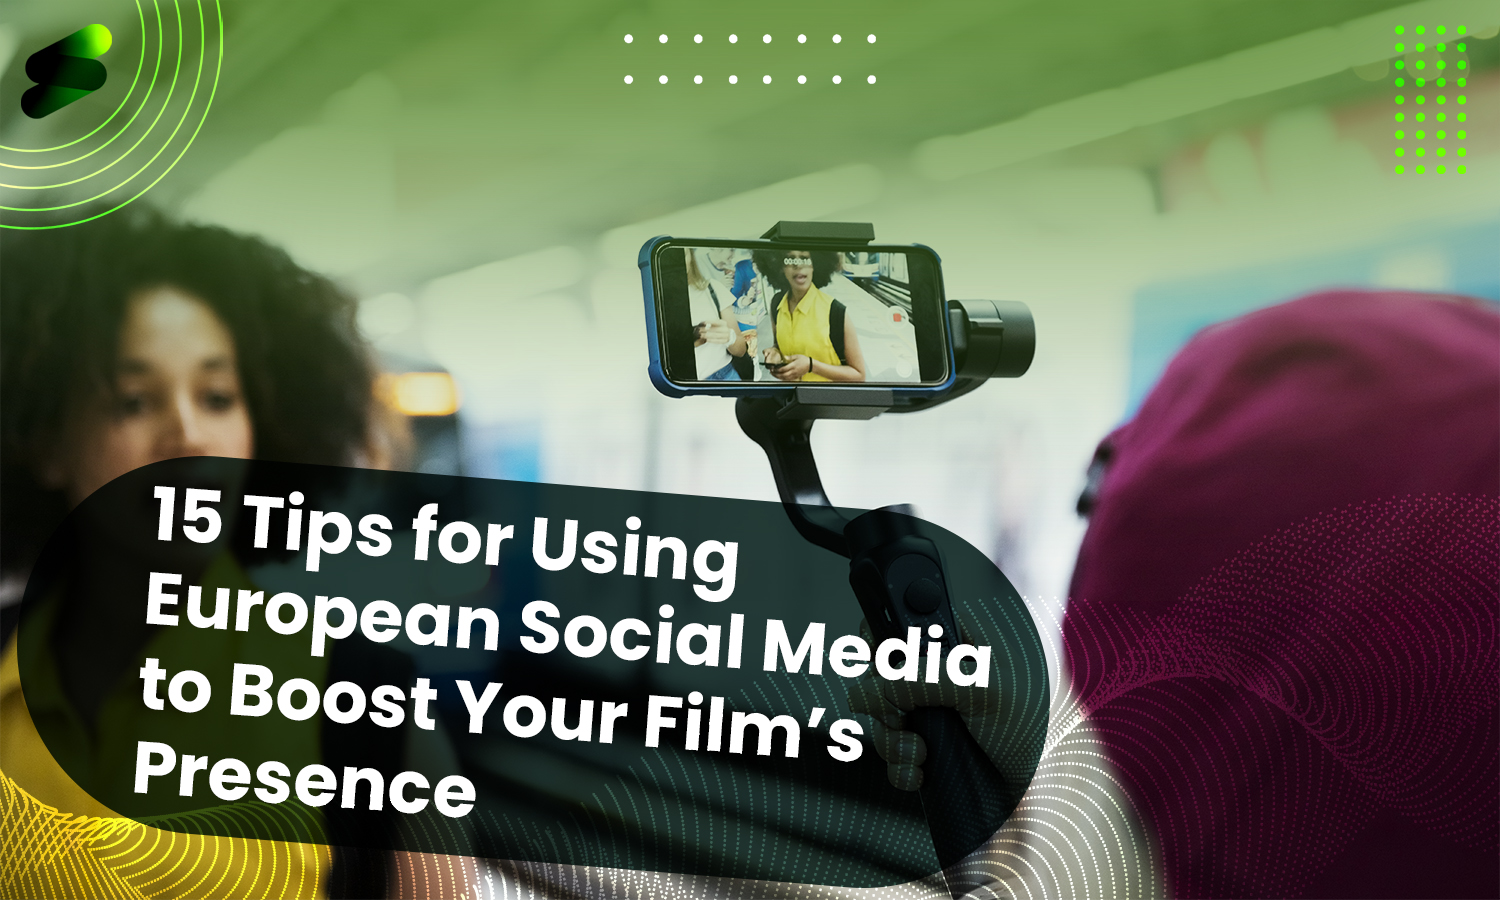 15 Tips for Using European Social Media to Boost Your Film’s Presence